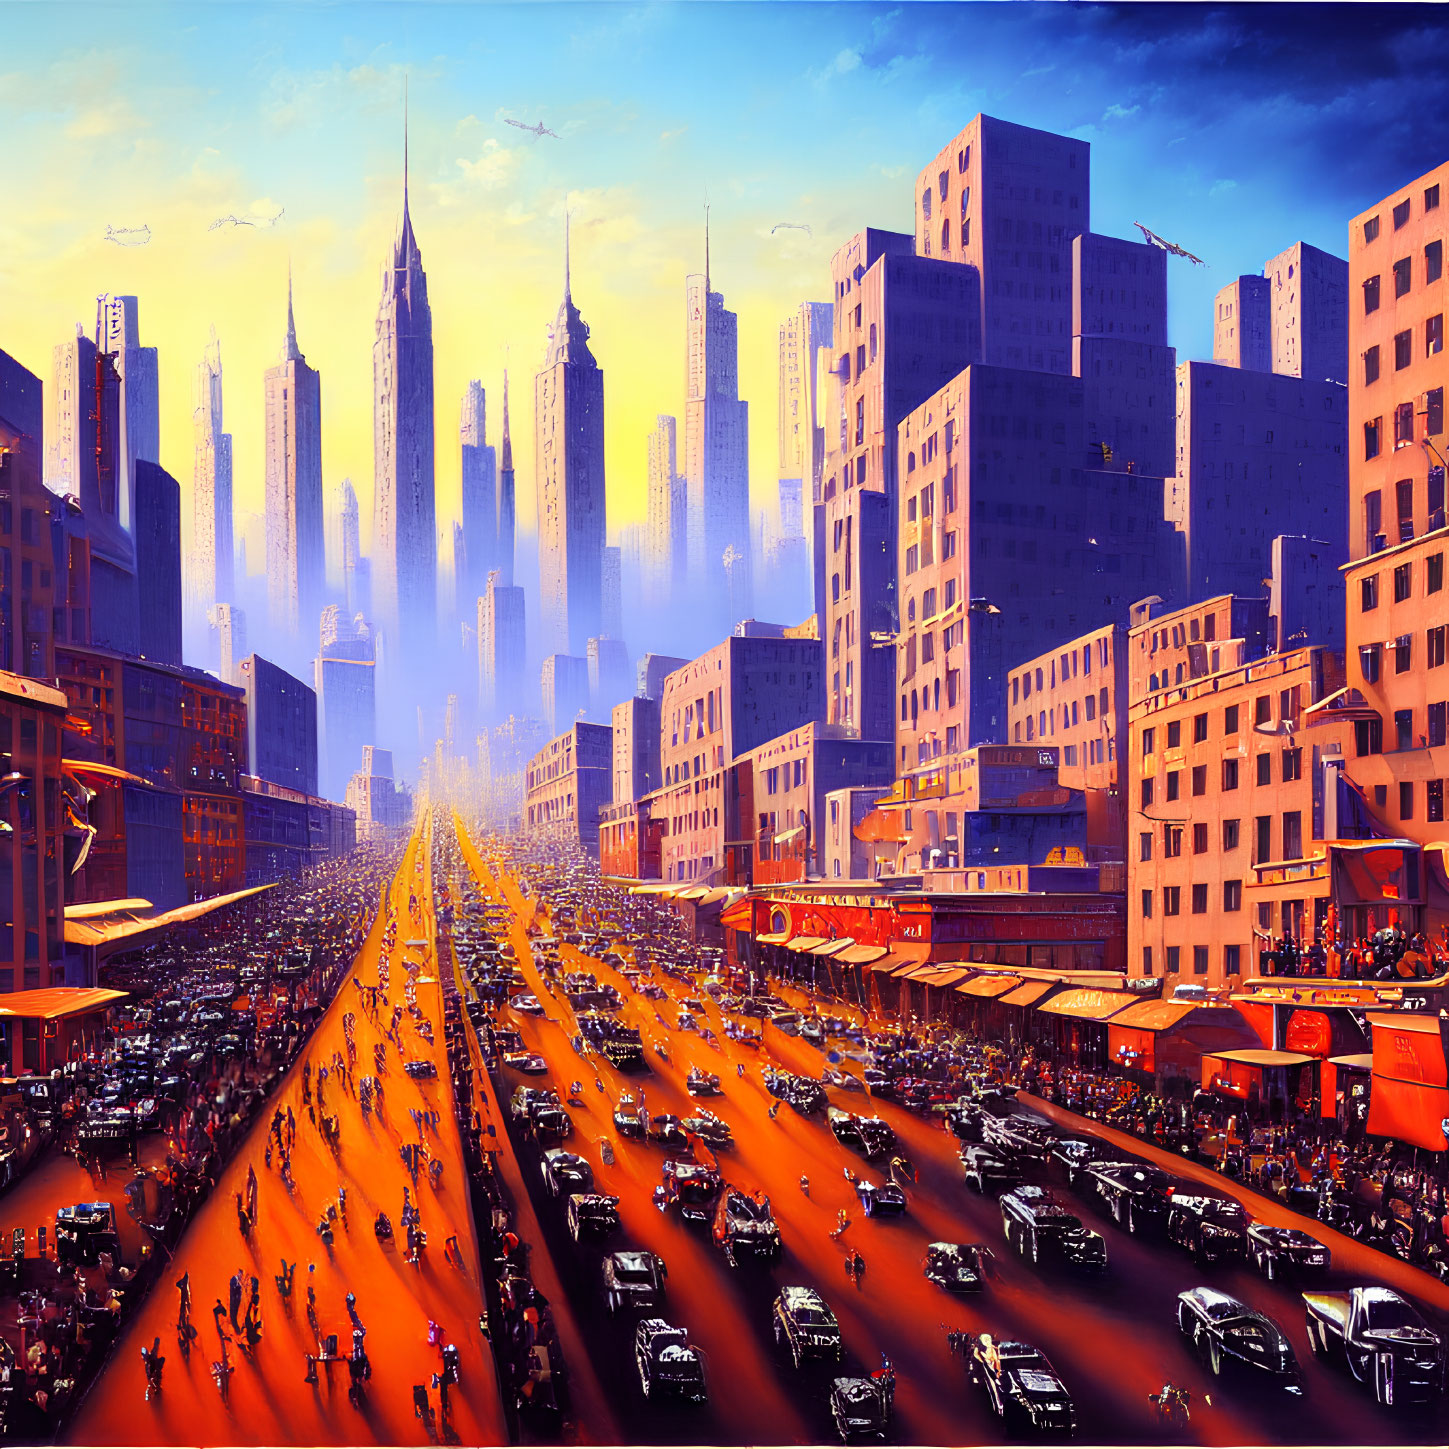 Busy cityscape with traffic and high-rise buildings under sunlight